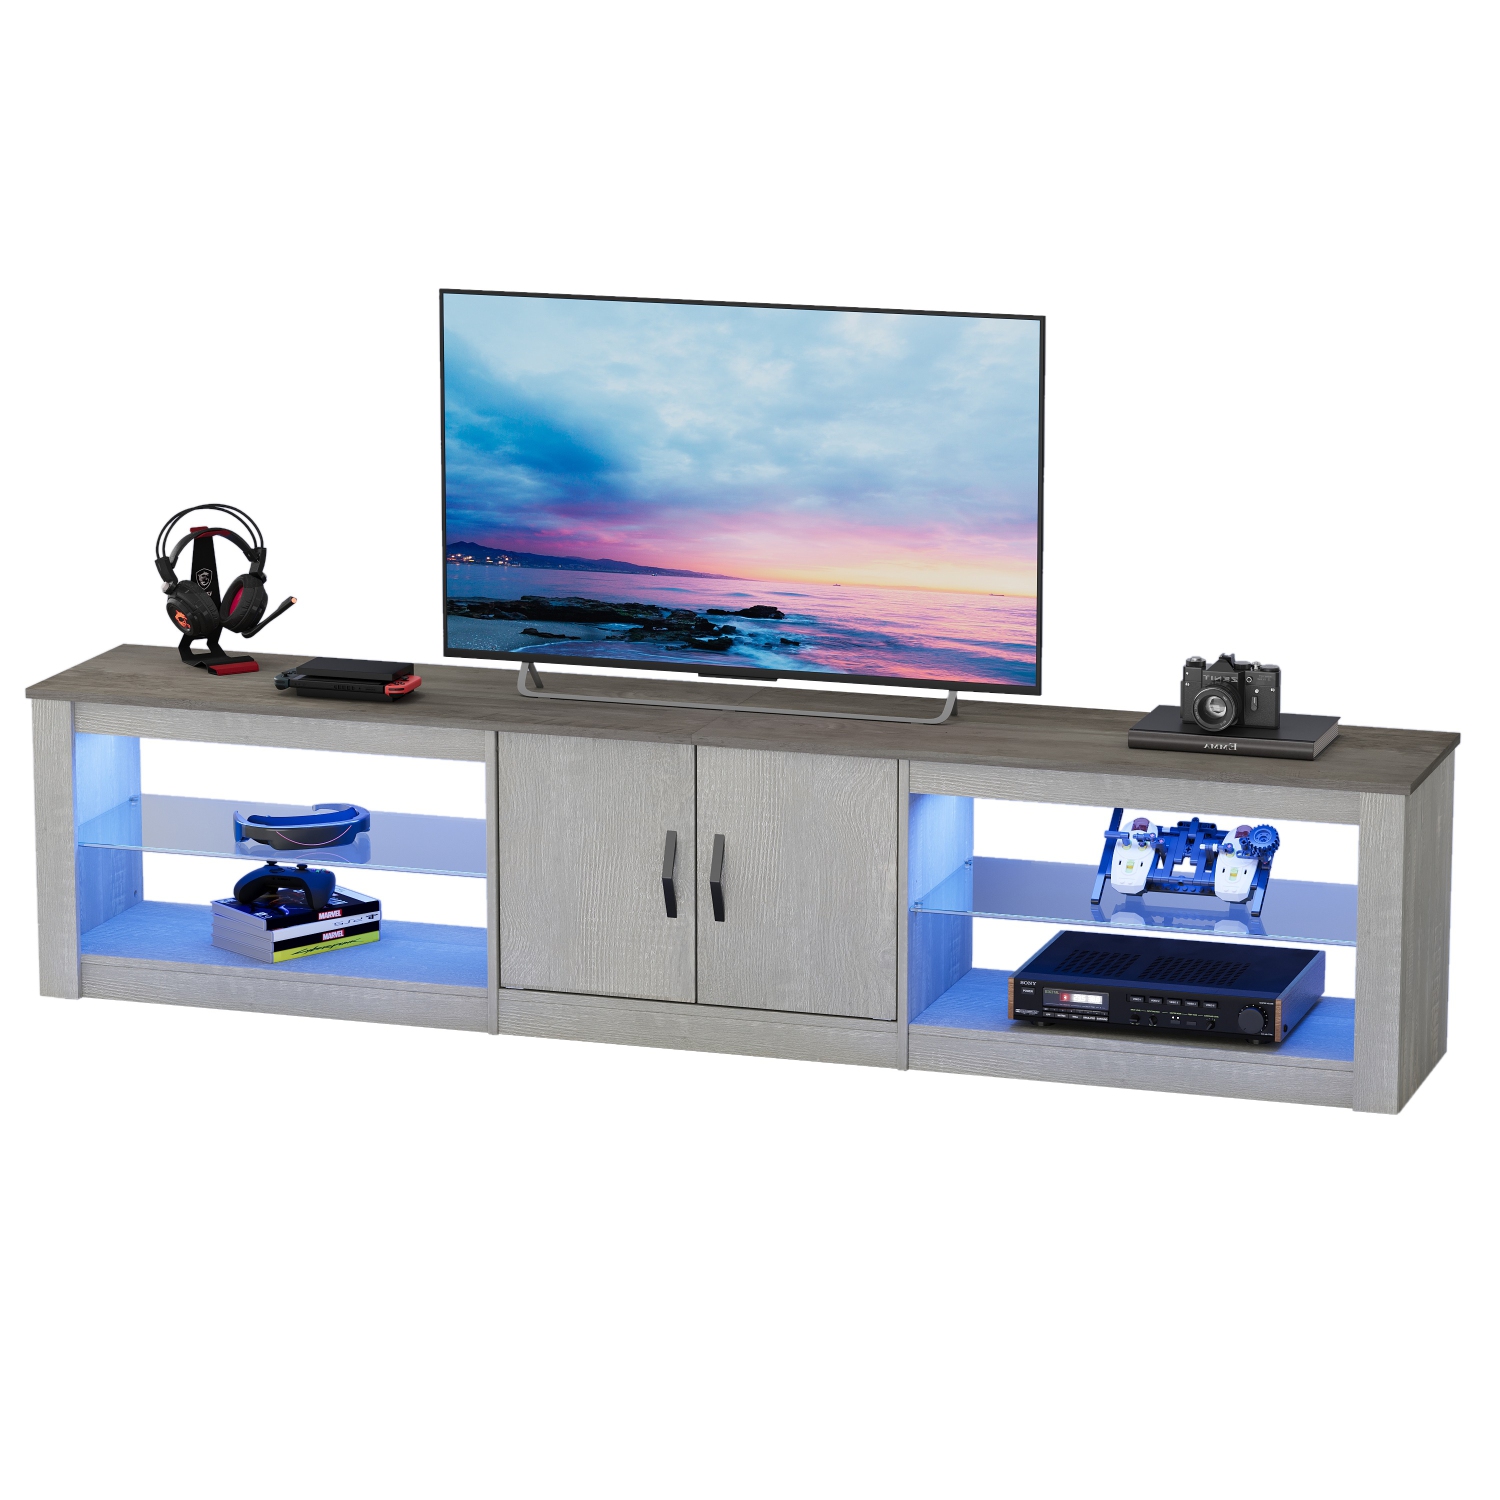 Bestier 80 Inch TV Stand for Large TVs 55/65/75/85/ inch, LED Entertainment Center with Two Cabinets, Adjustable Glass Shelves ＆ Cable Management, Gaming Tv Console for Living Room